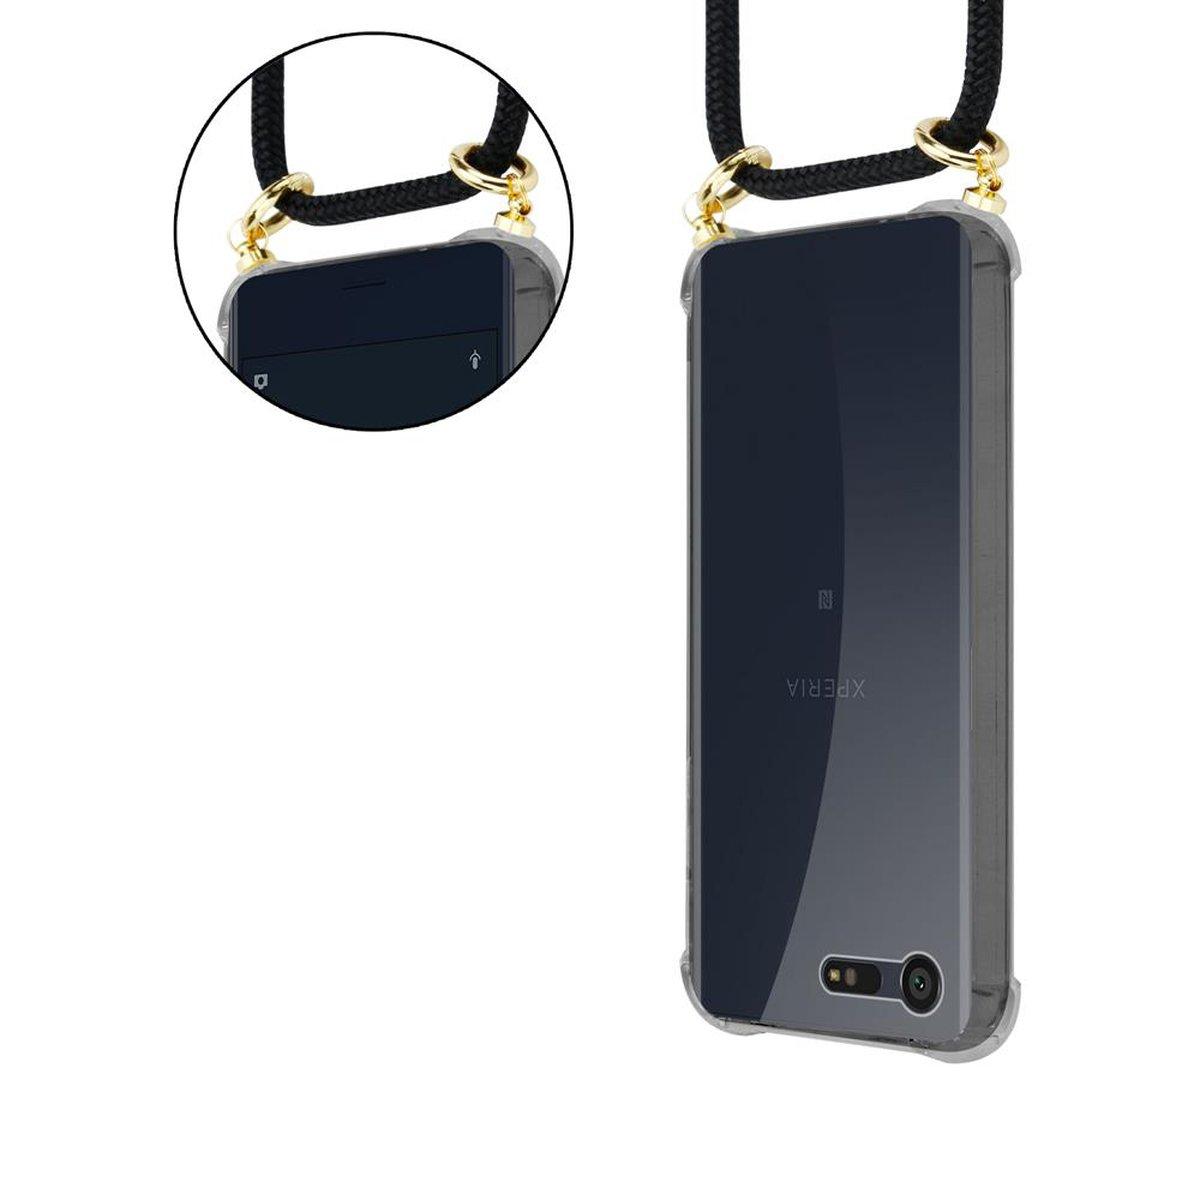 Kordel Hülle, Gold Kette abnehmbarer mit Sony, Backcover, Ringen, Xperia Band CADORABO X und SCHWARZ Handy COMPACT,